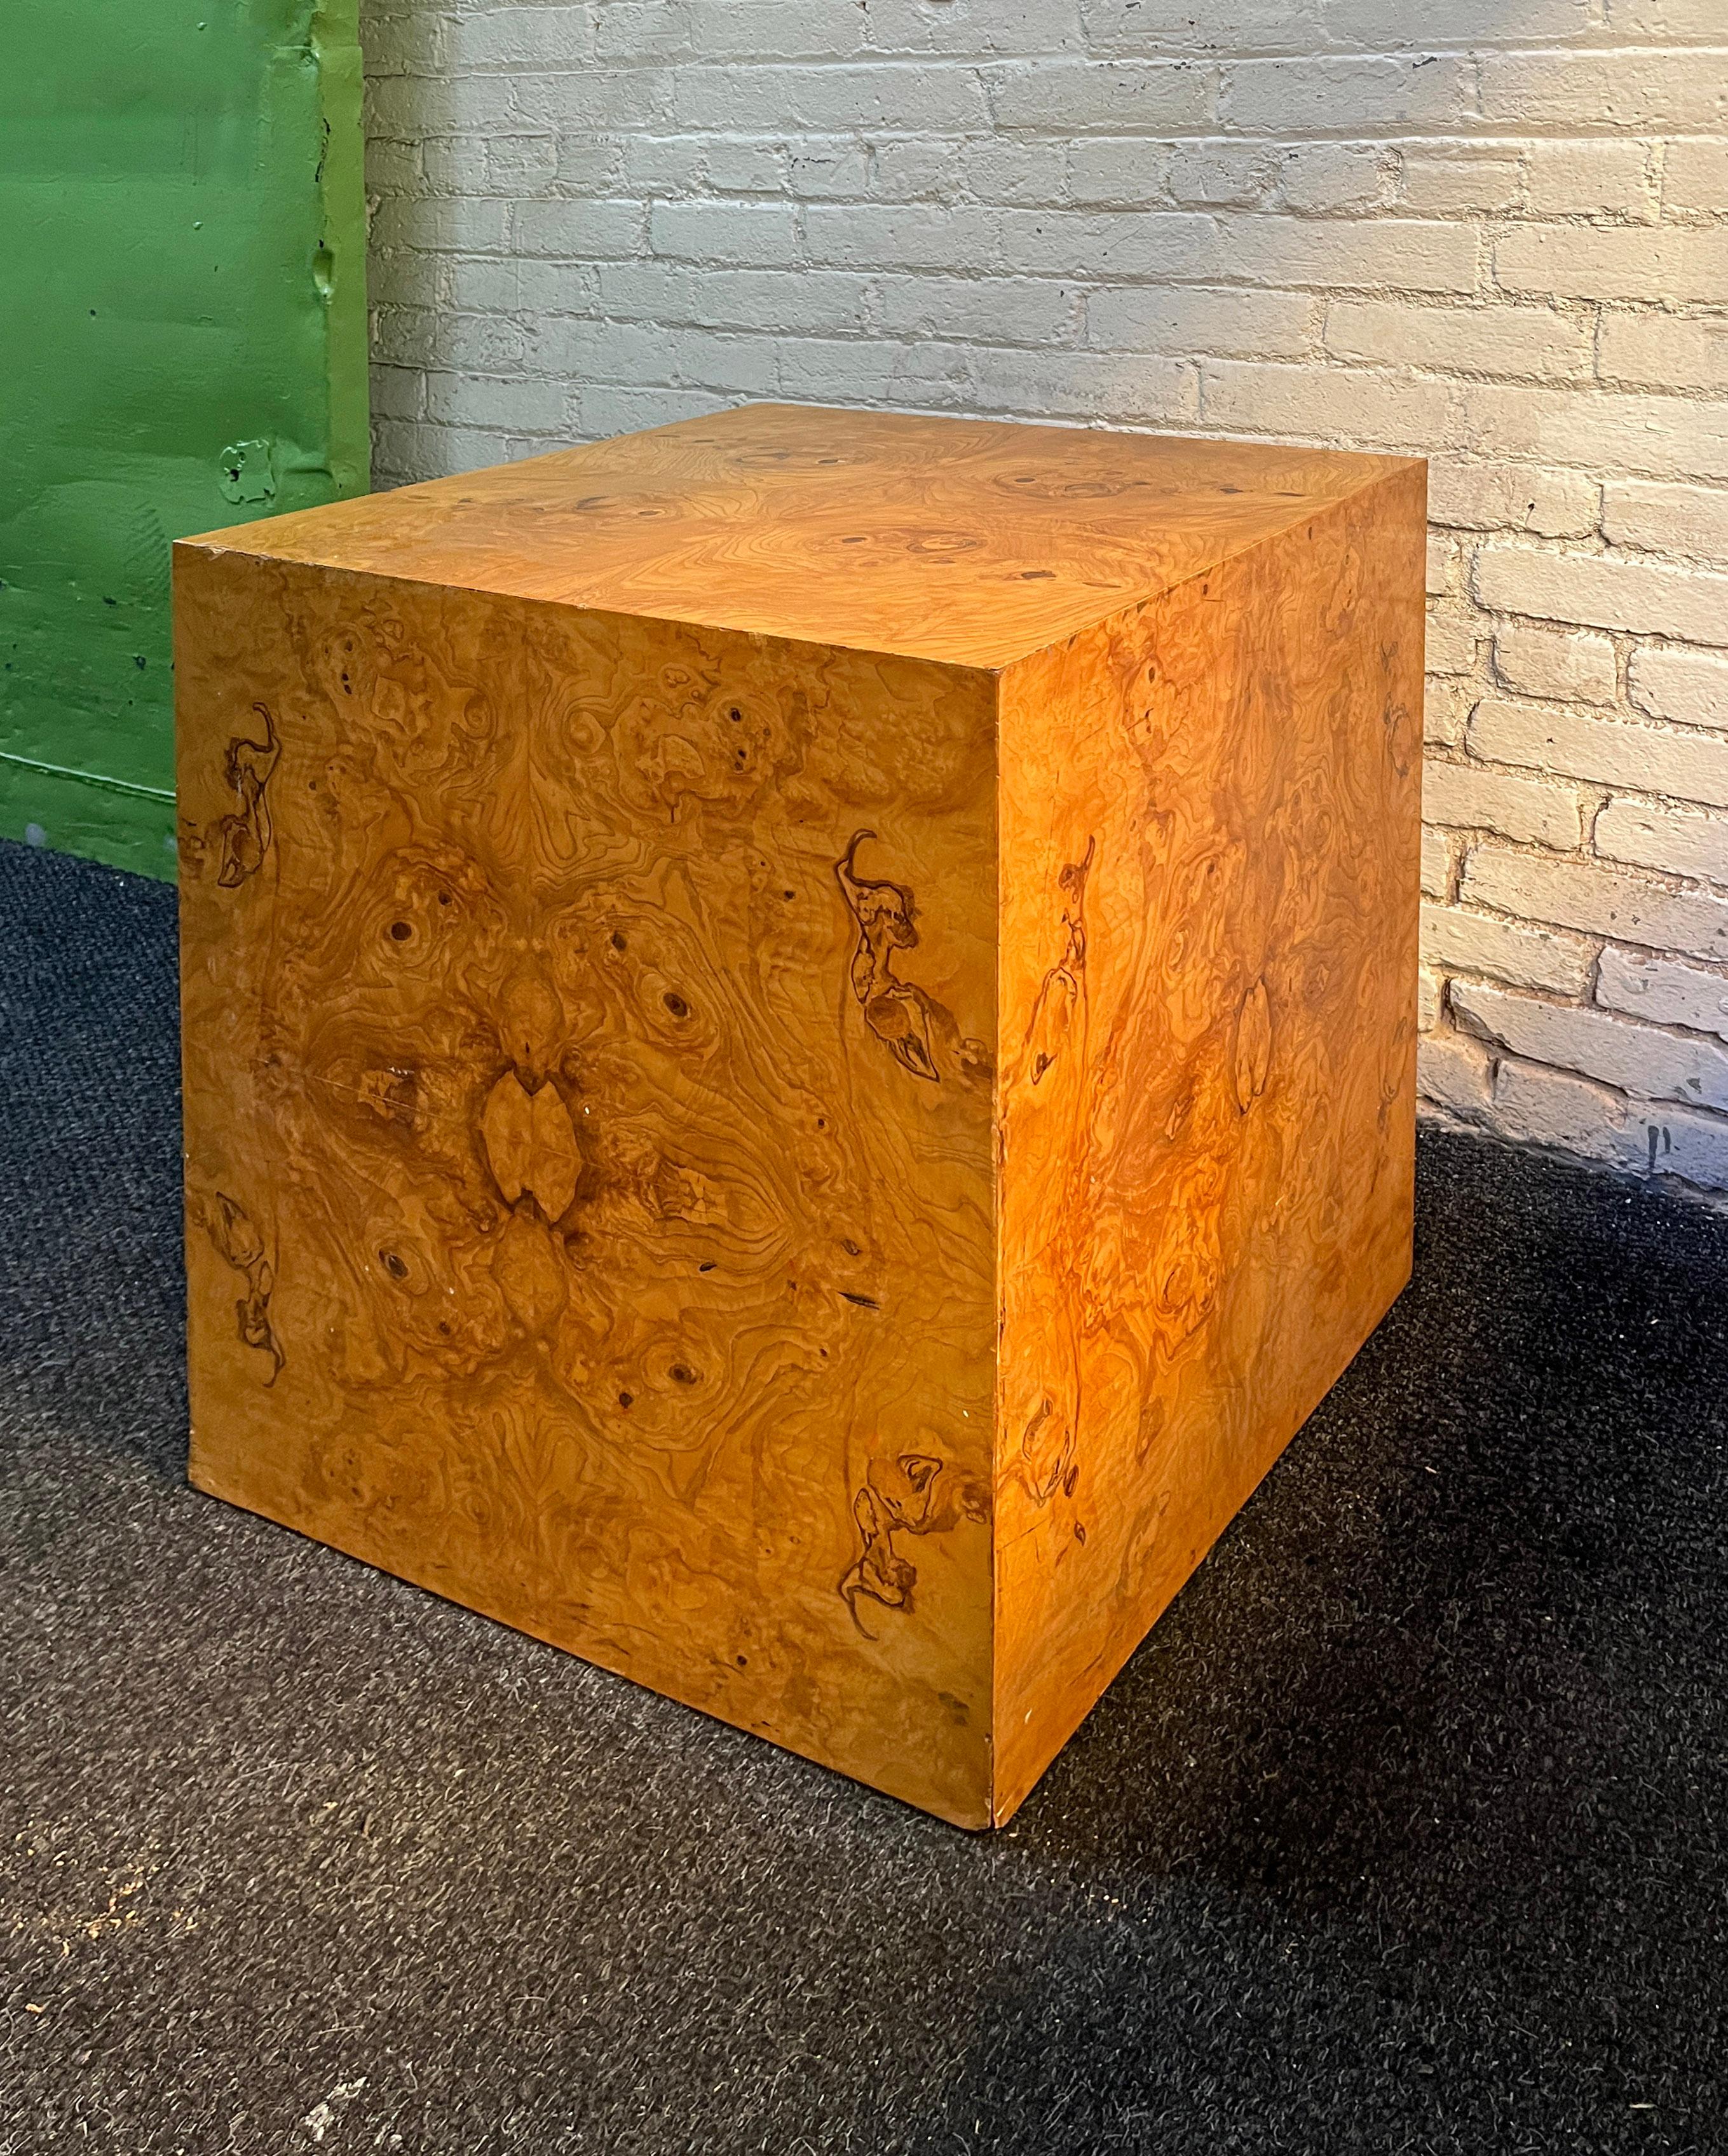 This is one awesome Mid-Century Modern burlwood cube side table / Pedestal Attributed to Milo Baughman 1970s. This side table is bookmatched with showing the beautiful bulrwood grain.